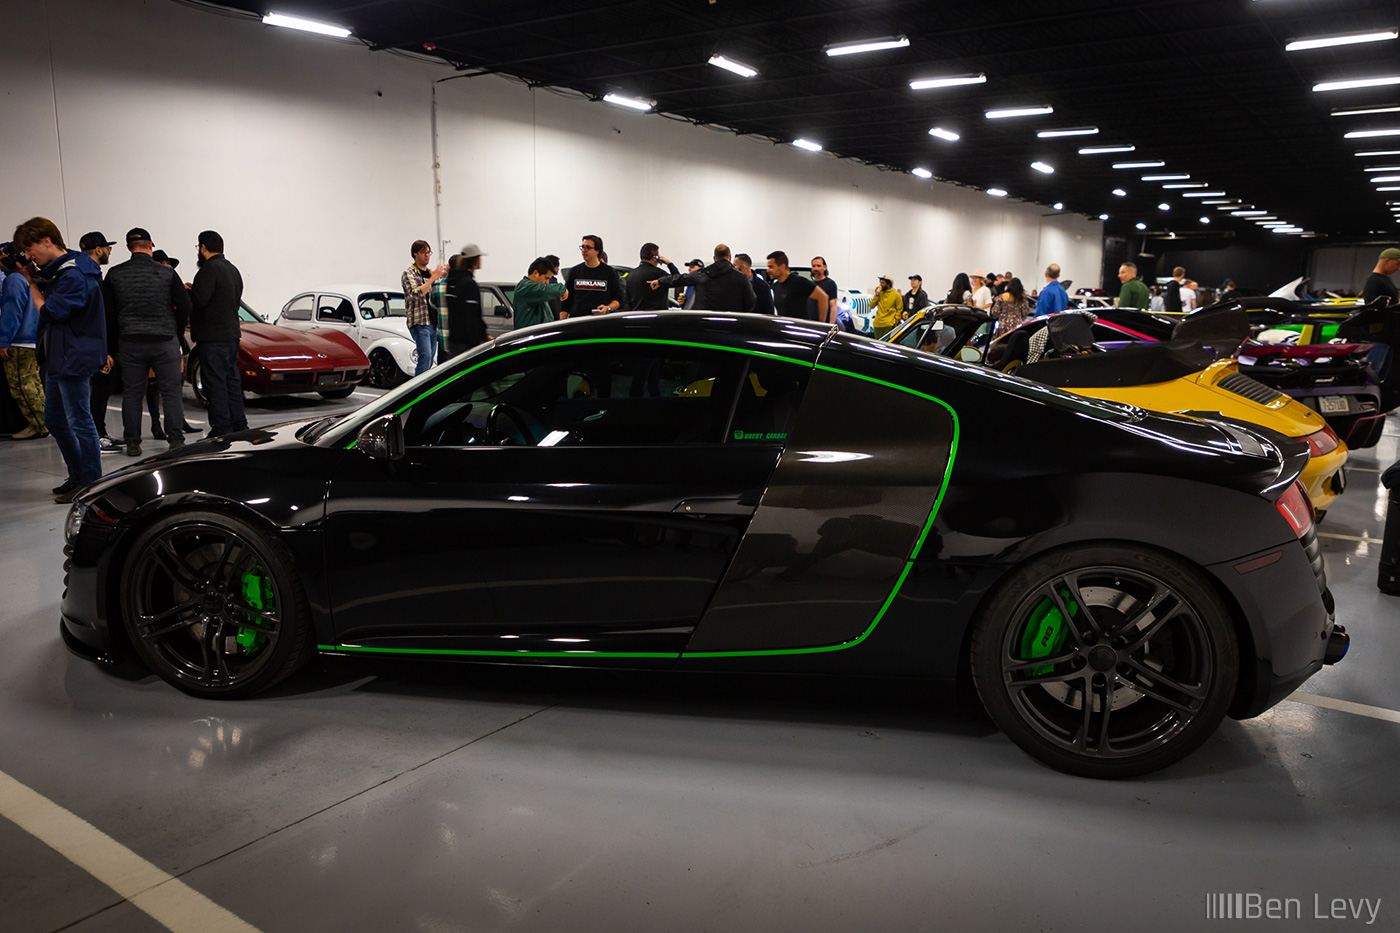 Black Audi R8 with Lime Green Accents